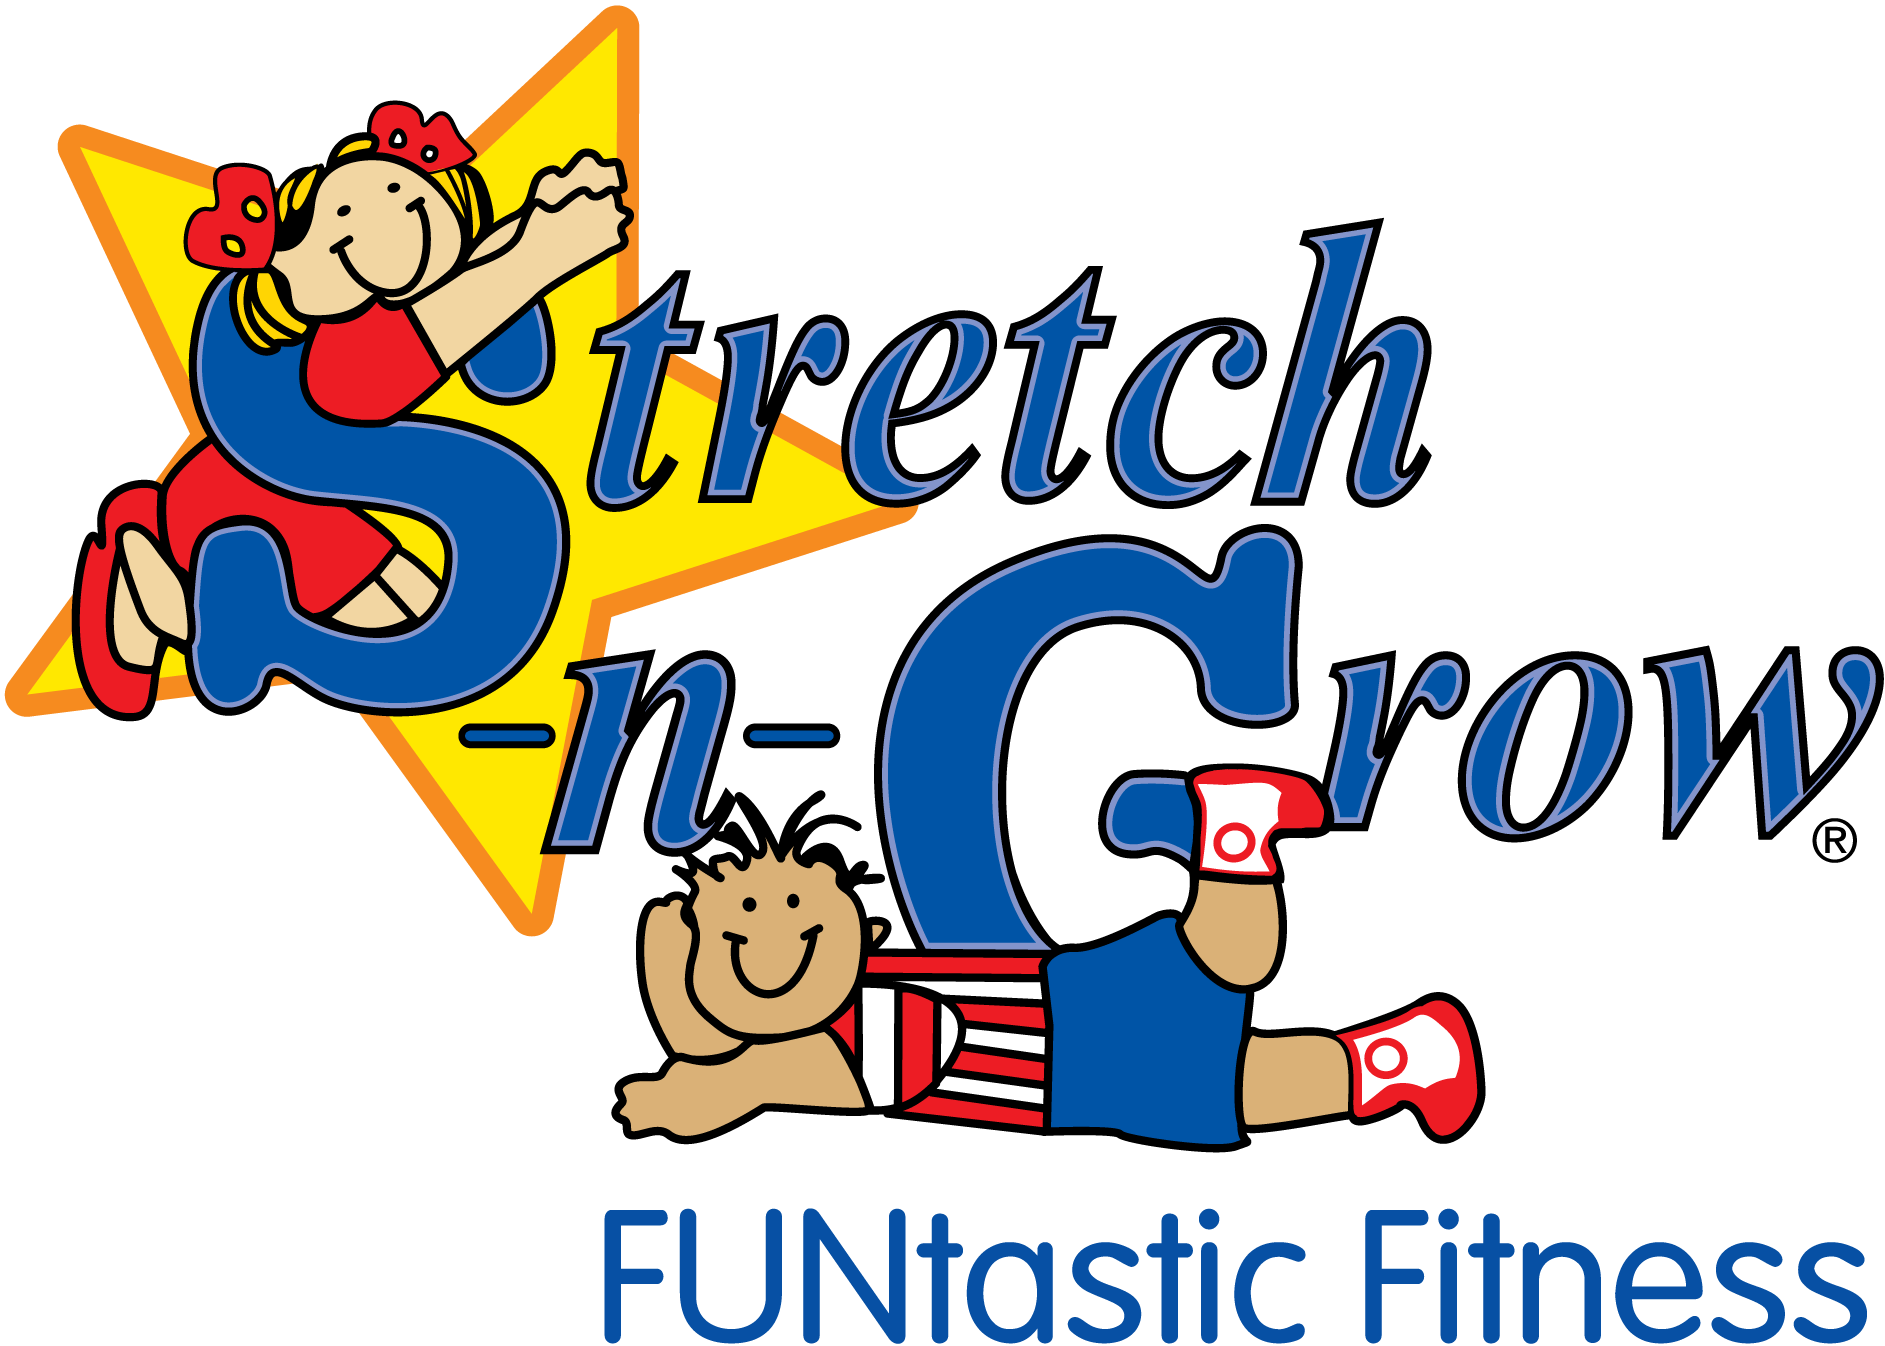 Fitness clipart school. Previews new hope christian